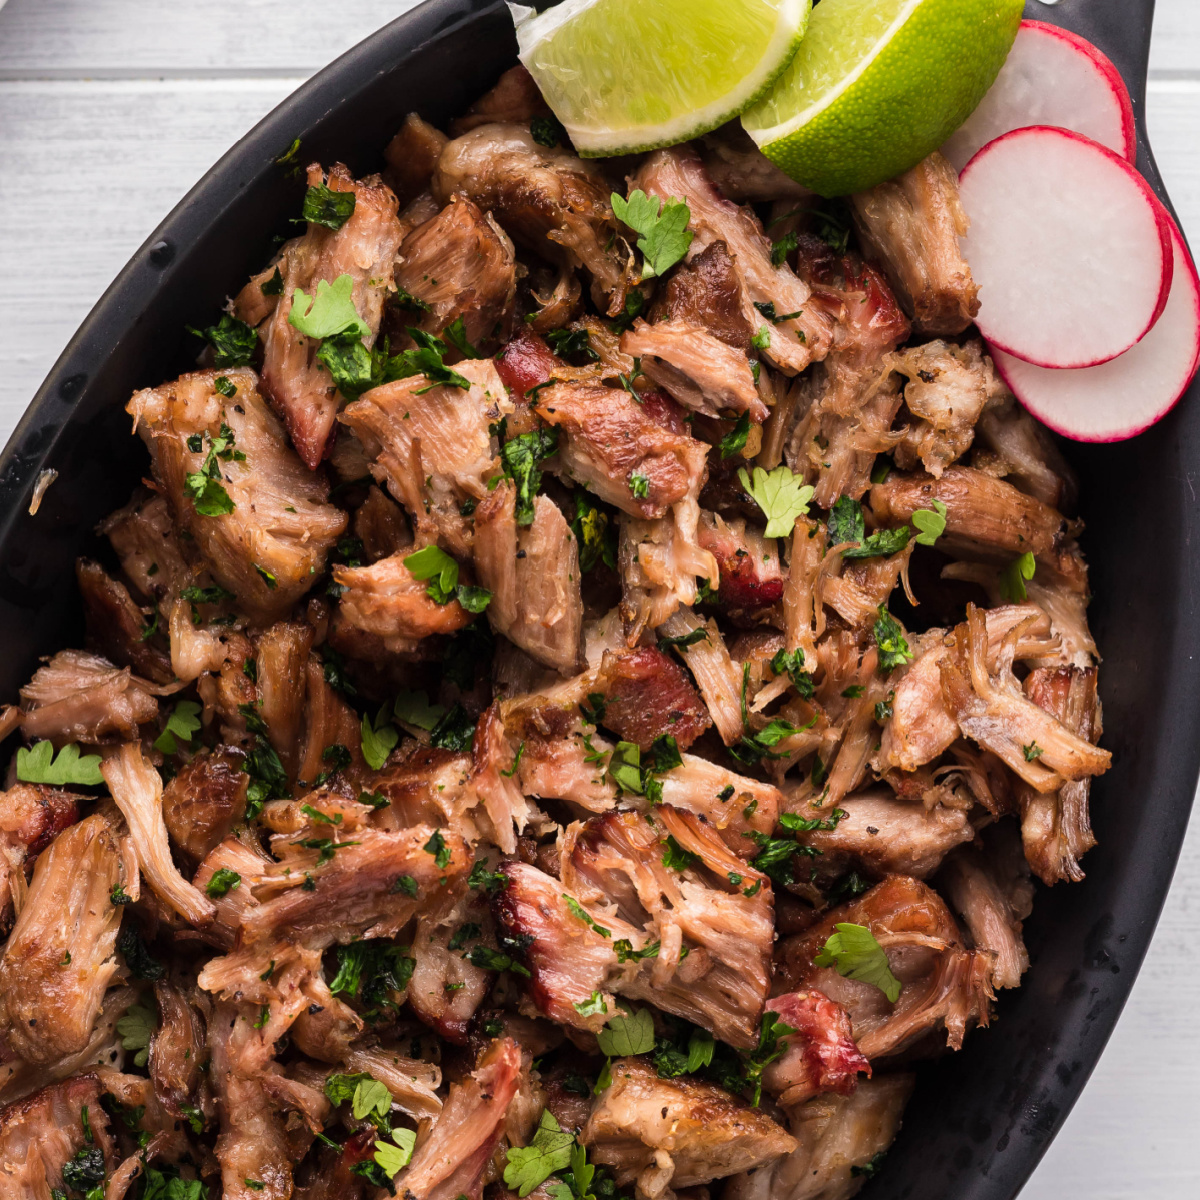 Smoked carnitas in an oval dish with slices of radish and lime wedges, garnished with chopped parsley.